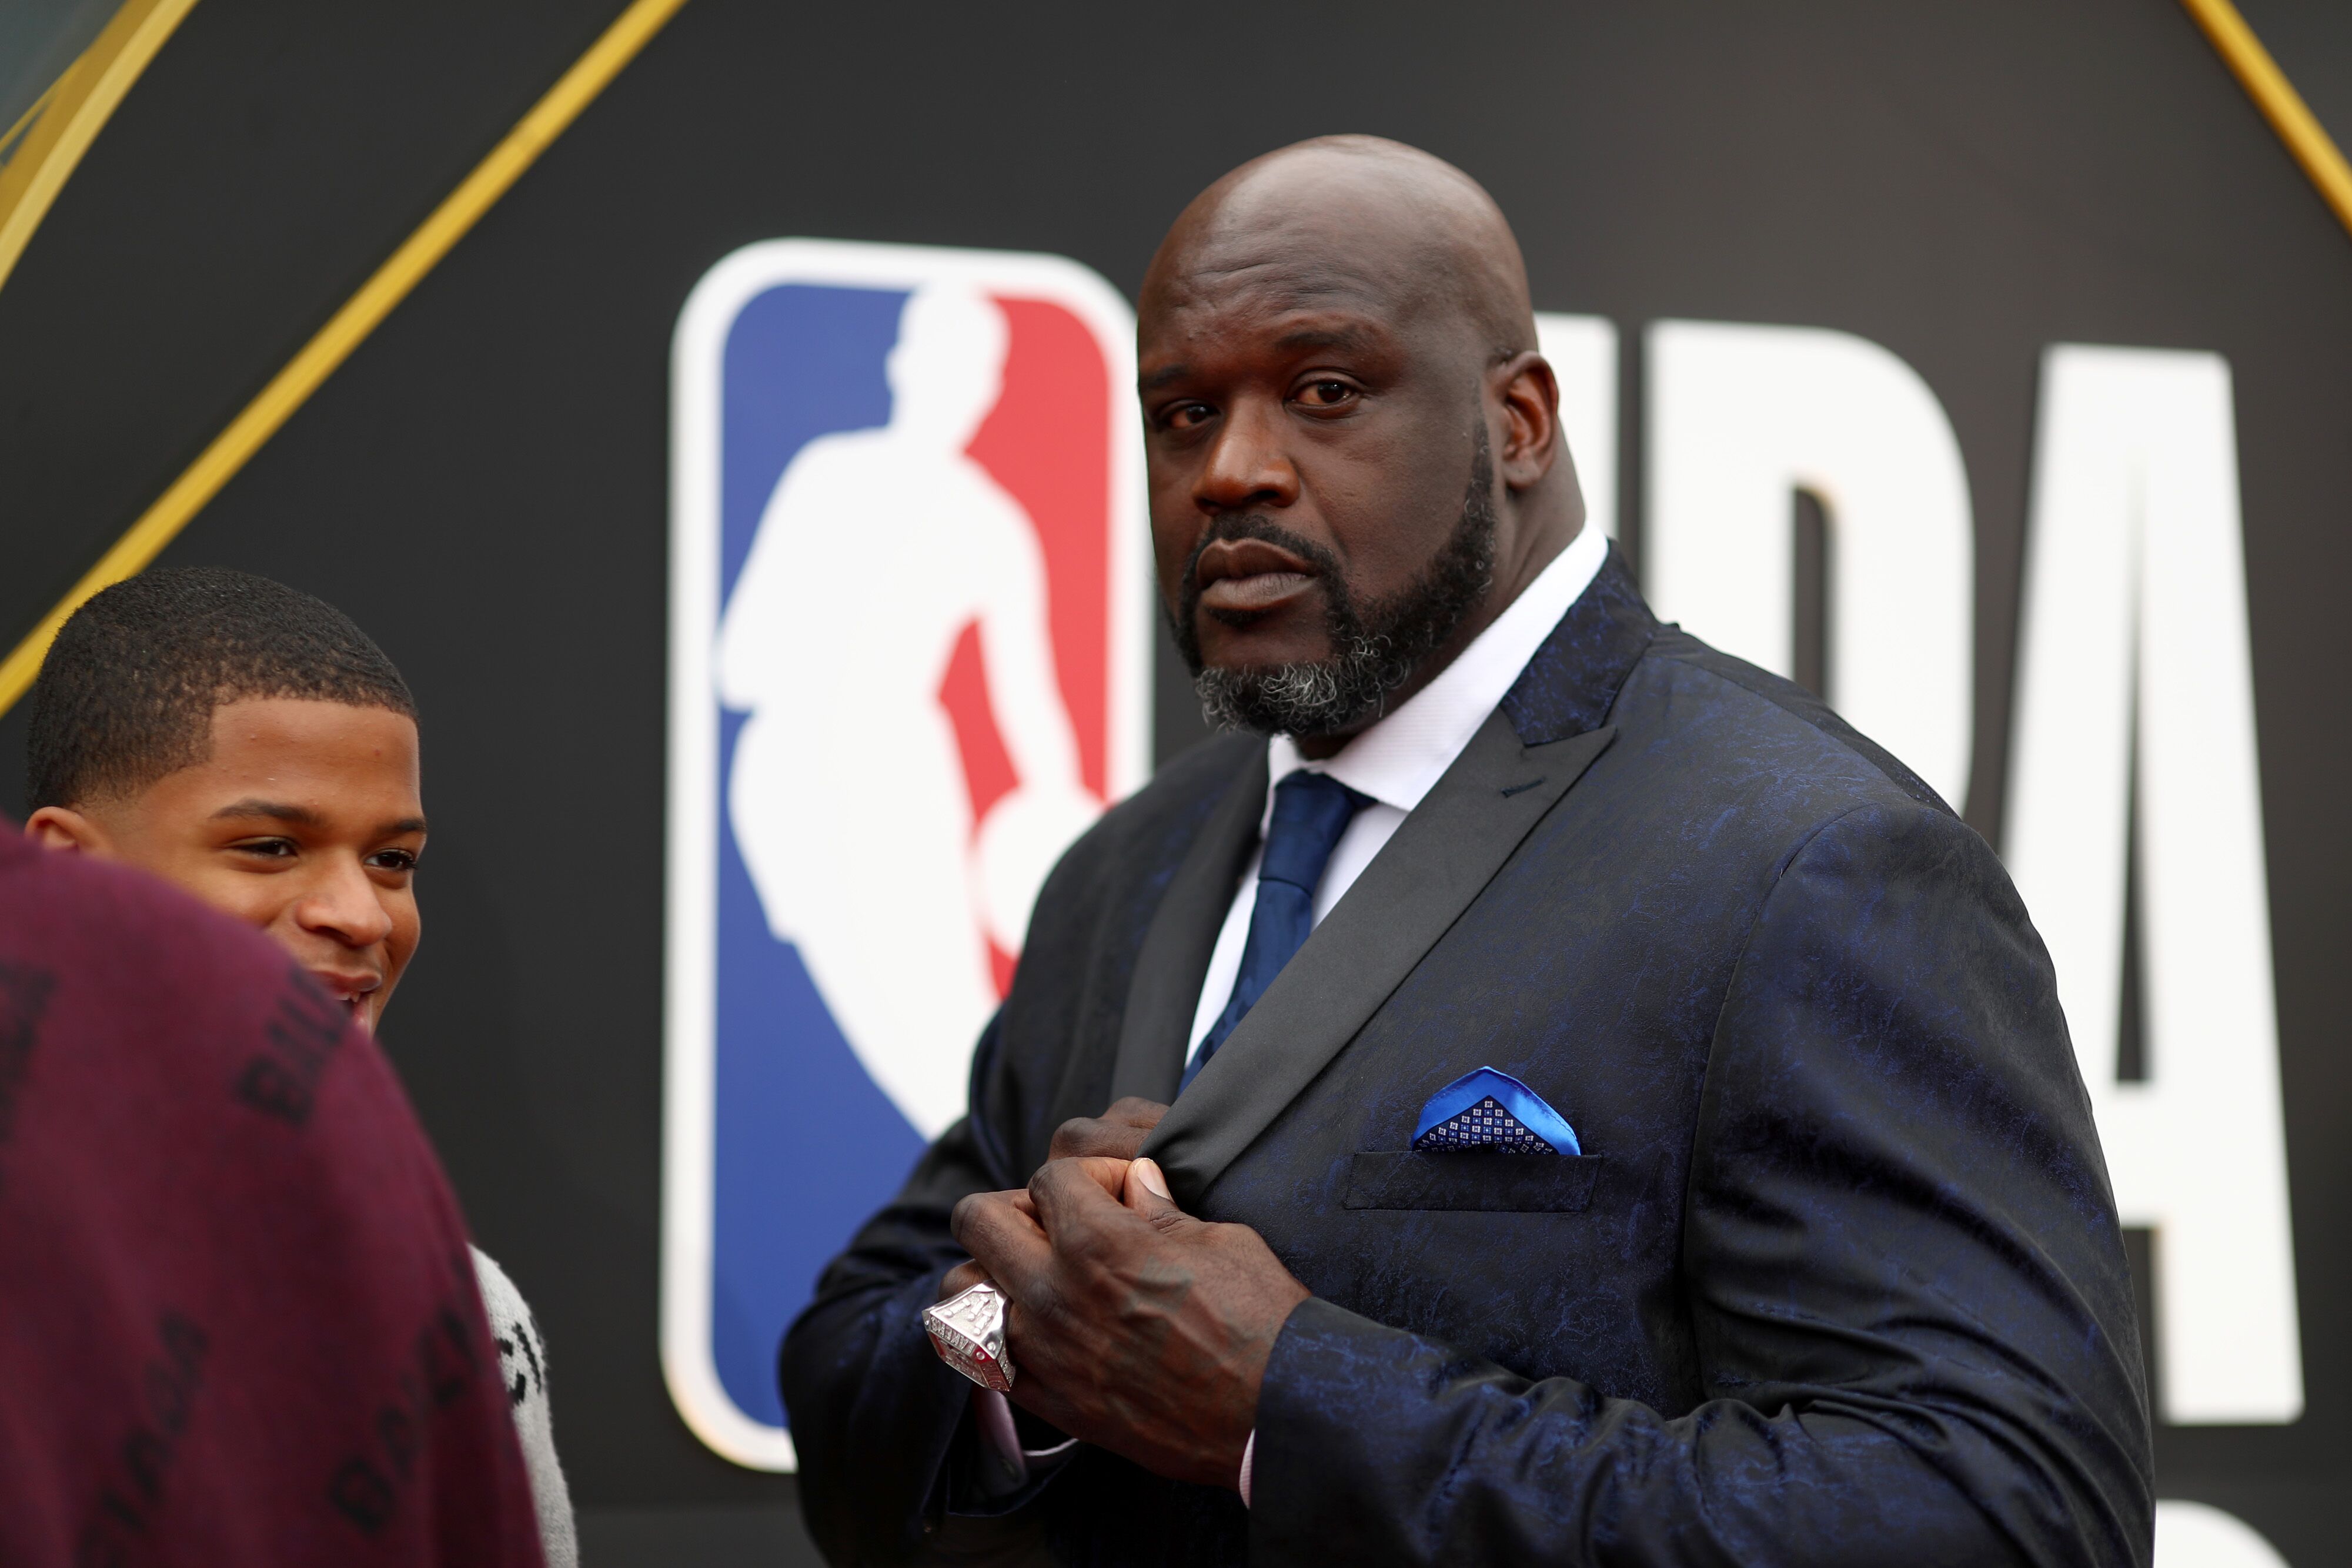 NBA legend Shaquille O'Neal in October 2019/ Source: Getty Images